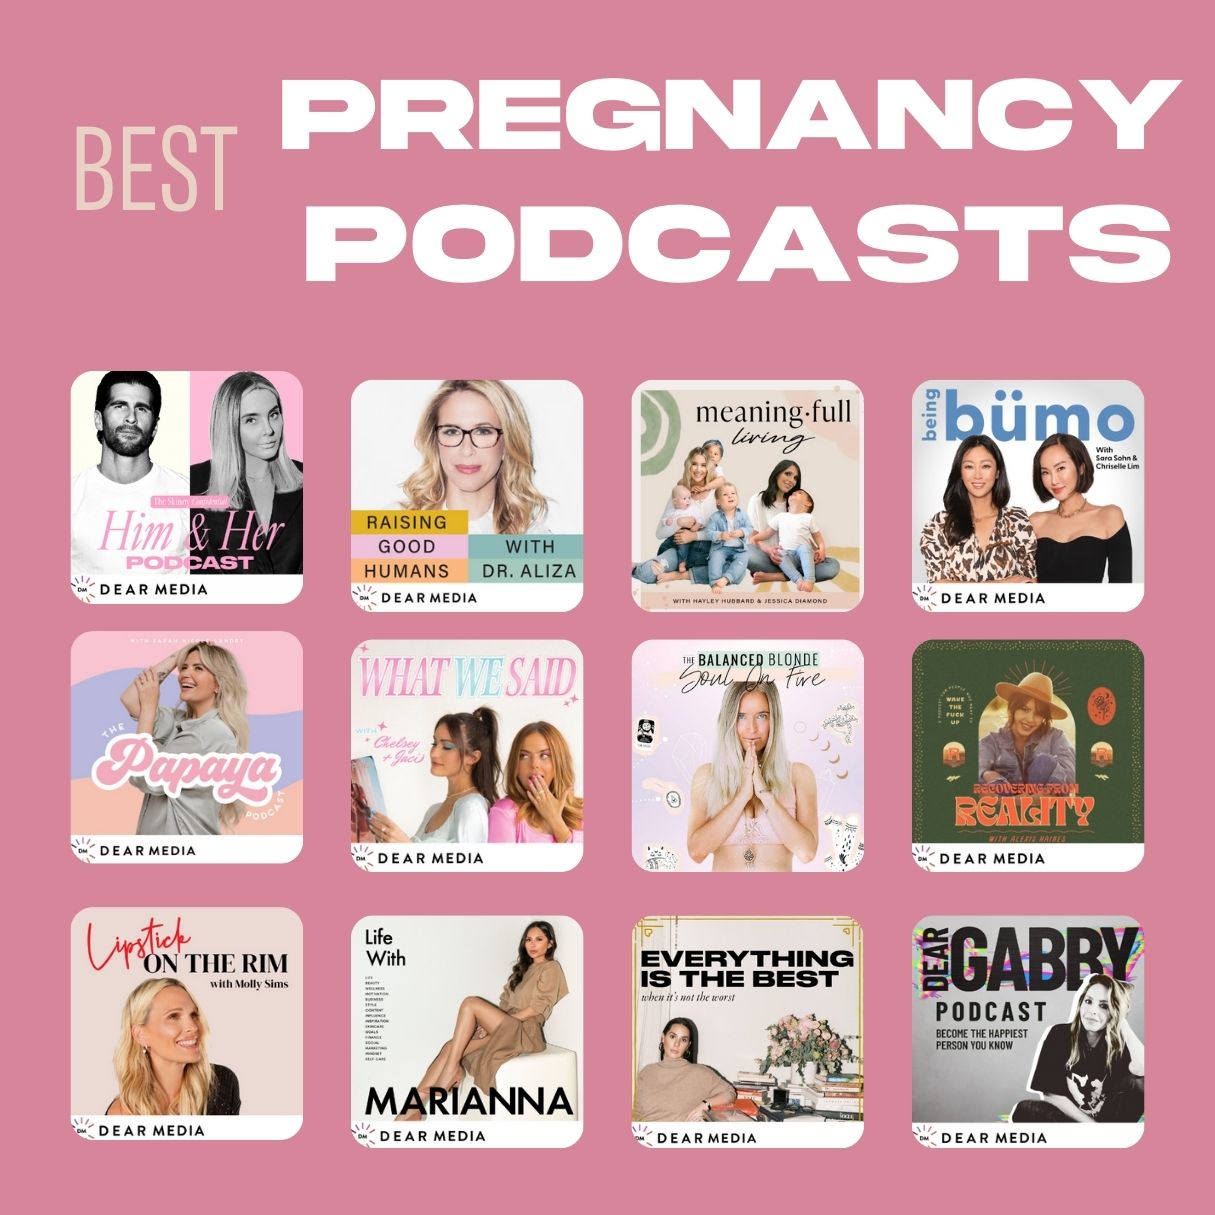 Best dear media pregnancy podcasts